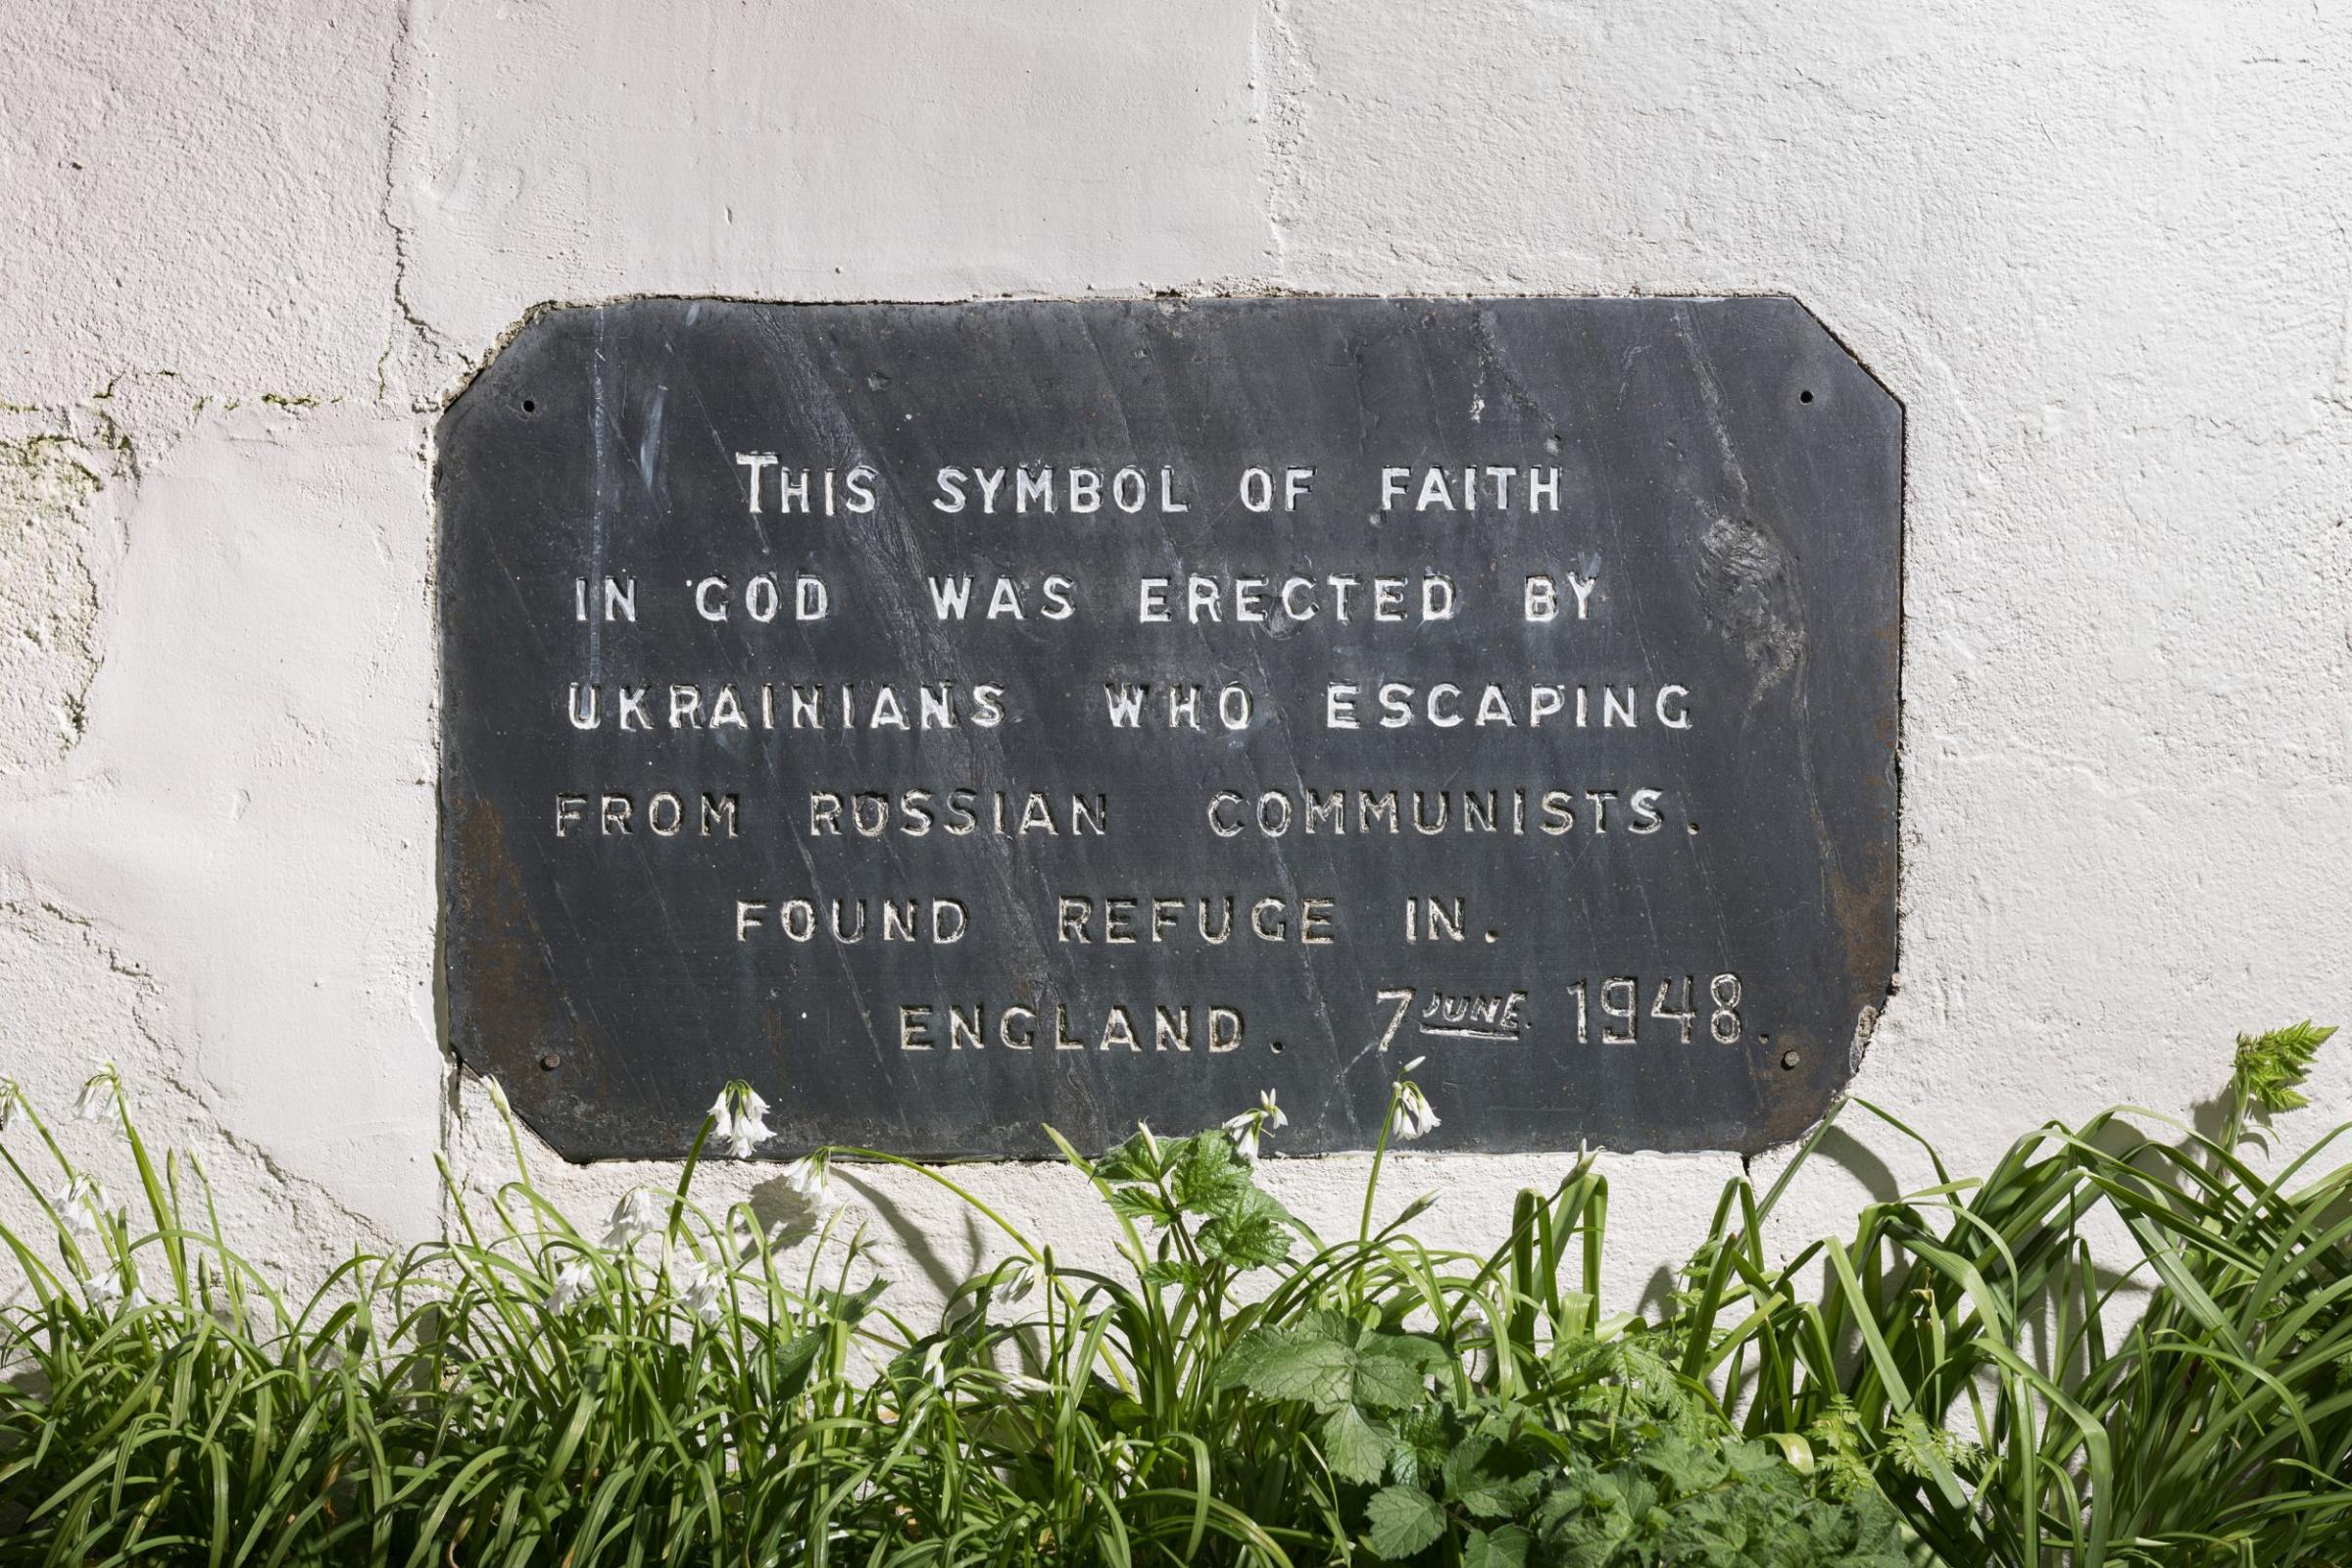 The inscription on the cross Picture: Historic England